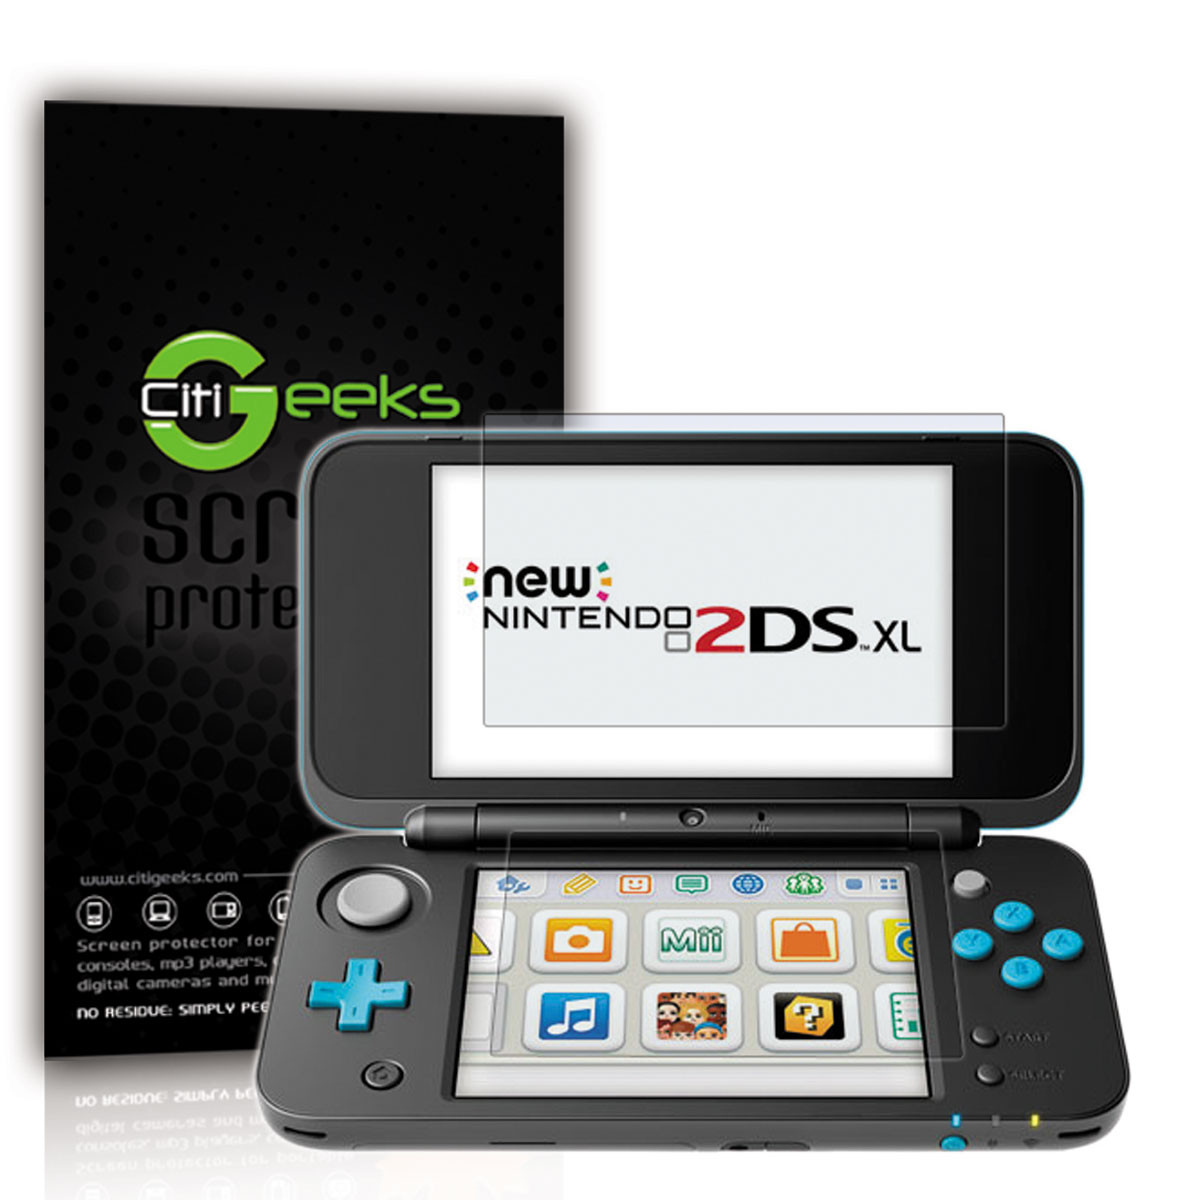 Screen Protector For Nintendo 2ds Xl Citigeeks